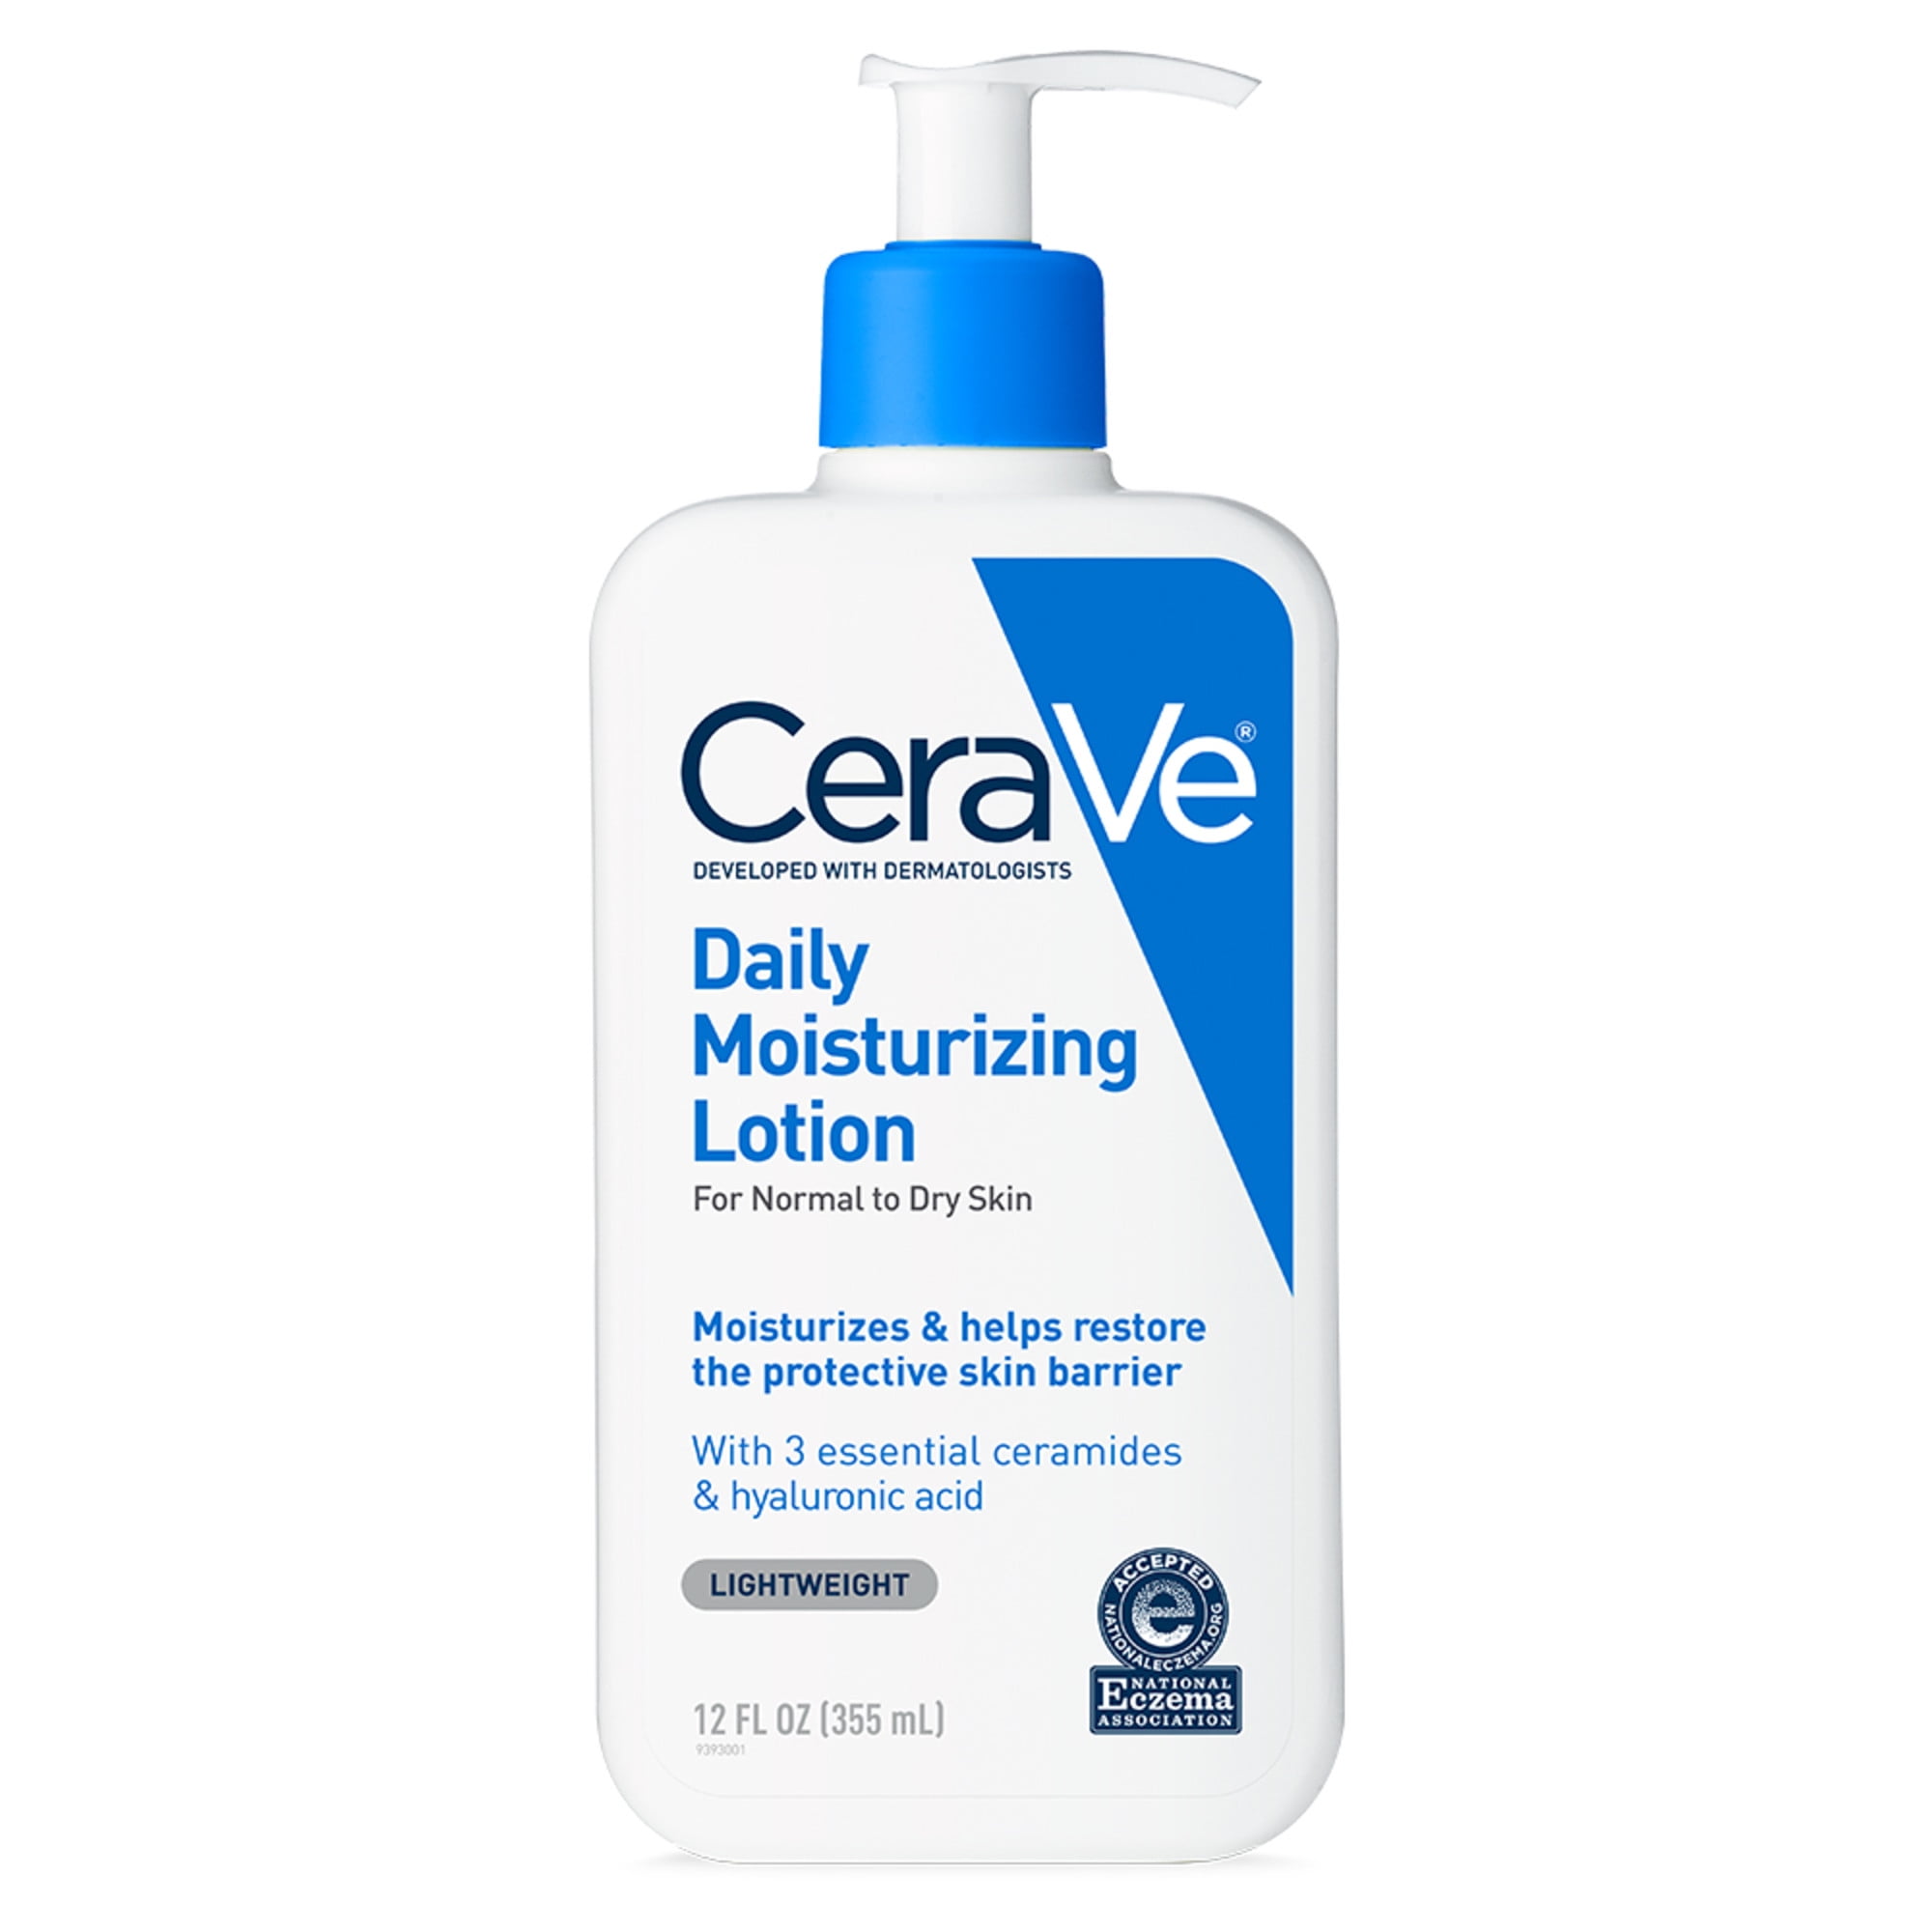 Cerave Daily Moisturizing Face and Body Lotion for Normal and Dry Skin, 12 oz - Walmart.com